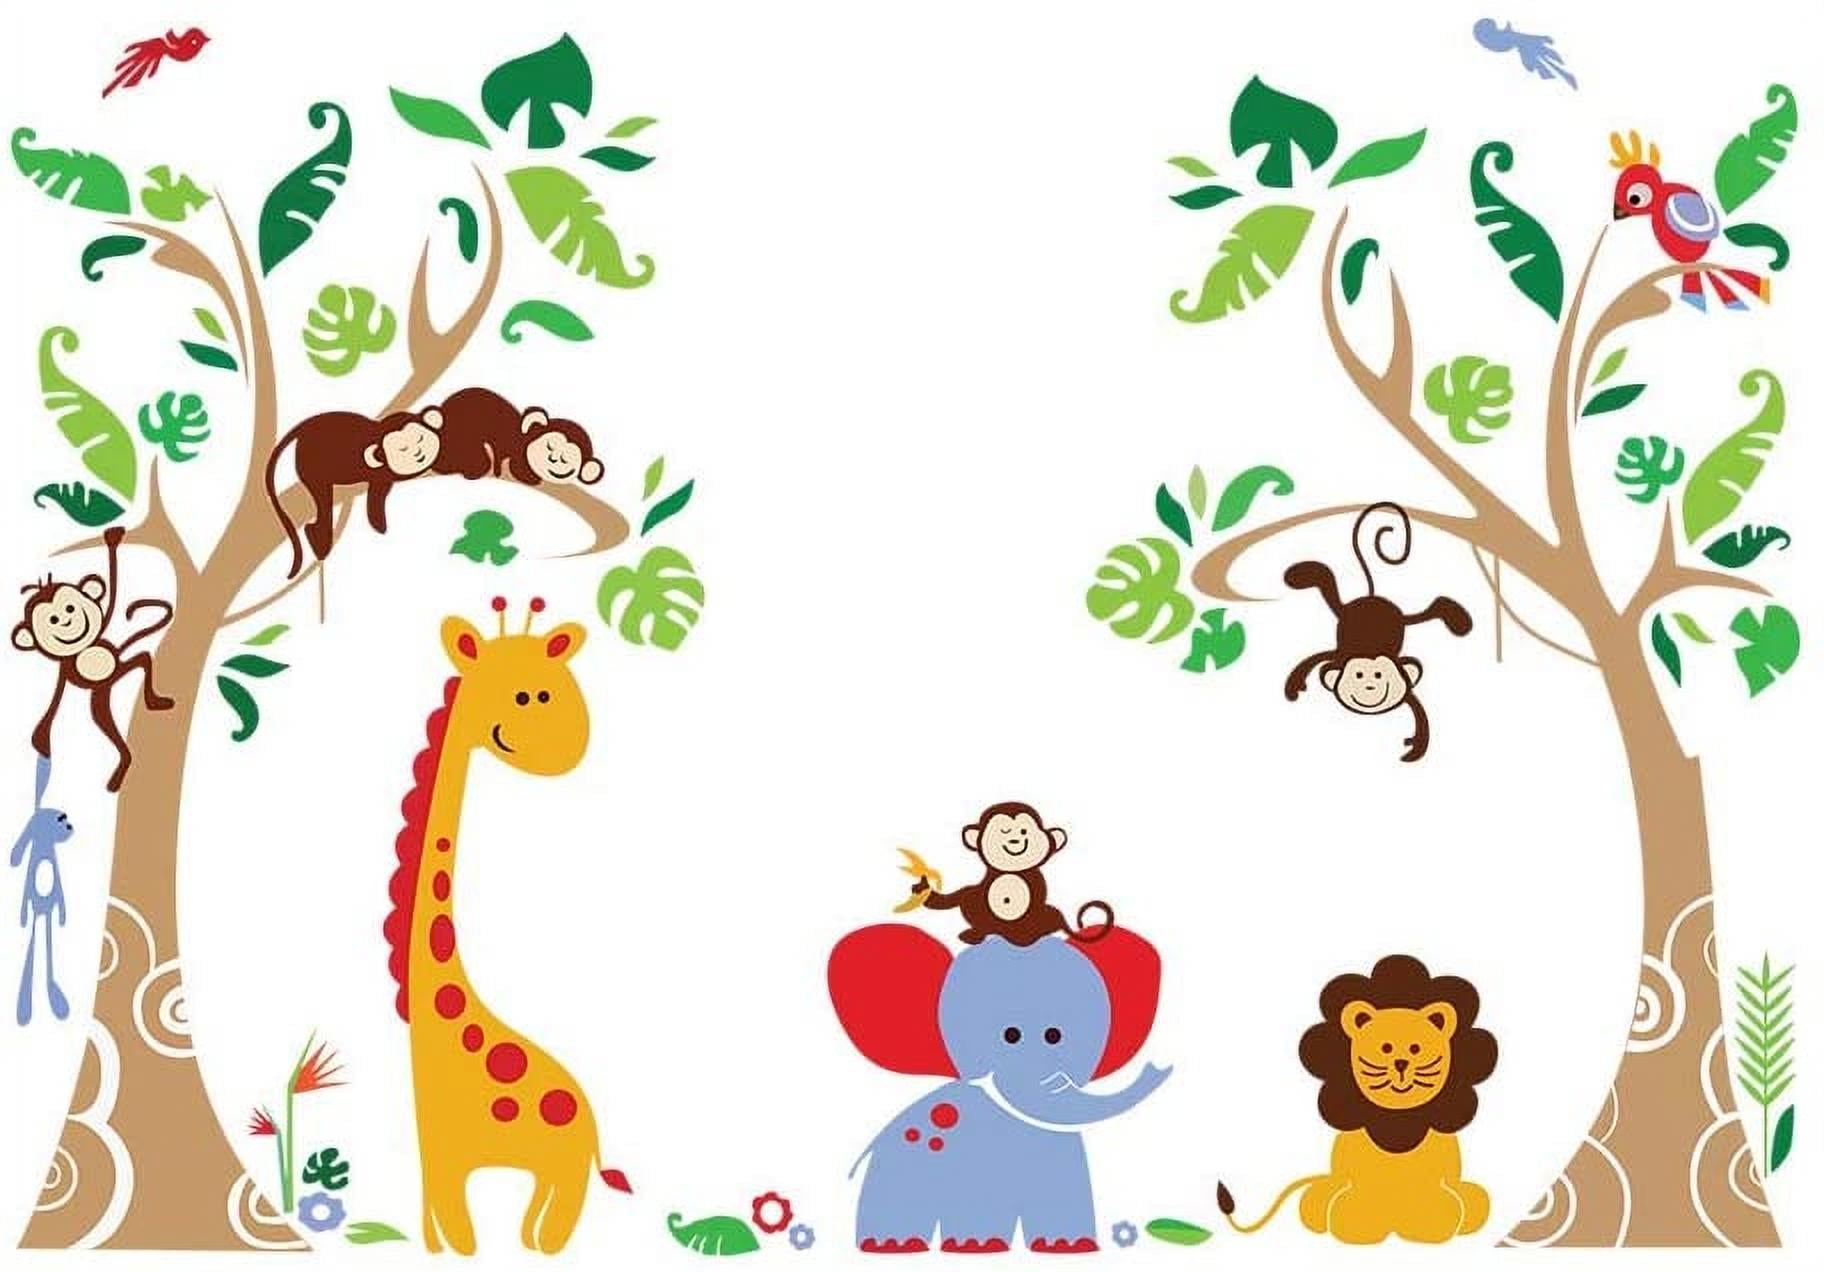 Details about   JUNGLE ANIMALS WALL DECALS Elephant Giraffe Palm Tree Stickers Baby Decor 